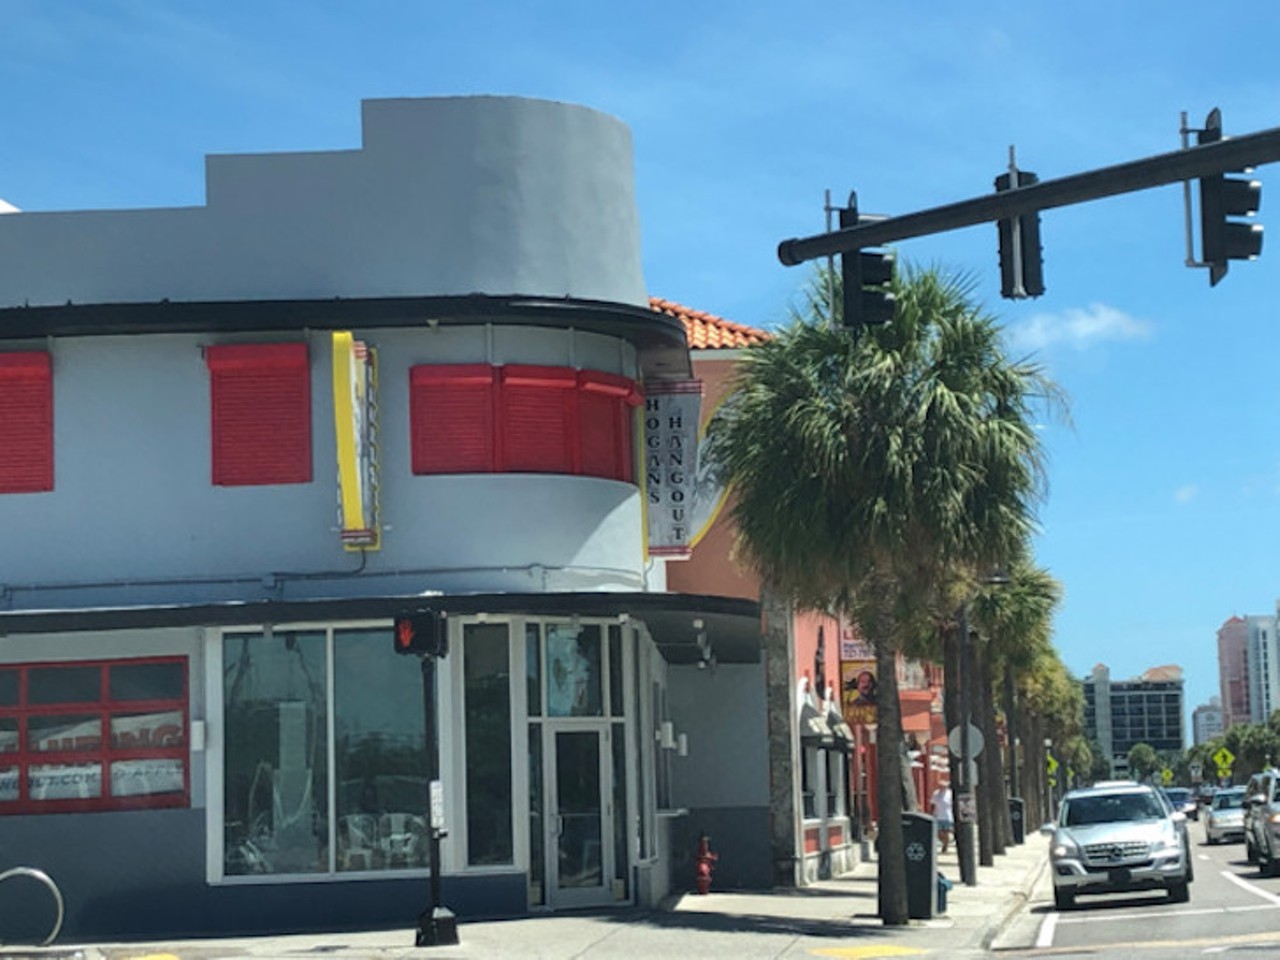 Hogan&#146;s Hangout  
499 Mandalay Ave., Clearwater.
Maniacs! WWE Hall of Famer, Hulk Hogan is opening a beach bar. A date has yet to be announced, but you can prepare for bar bites like burgers, soups, salads, and draft beers.
Photo via Colin Wolf